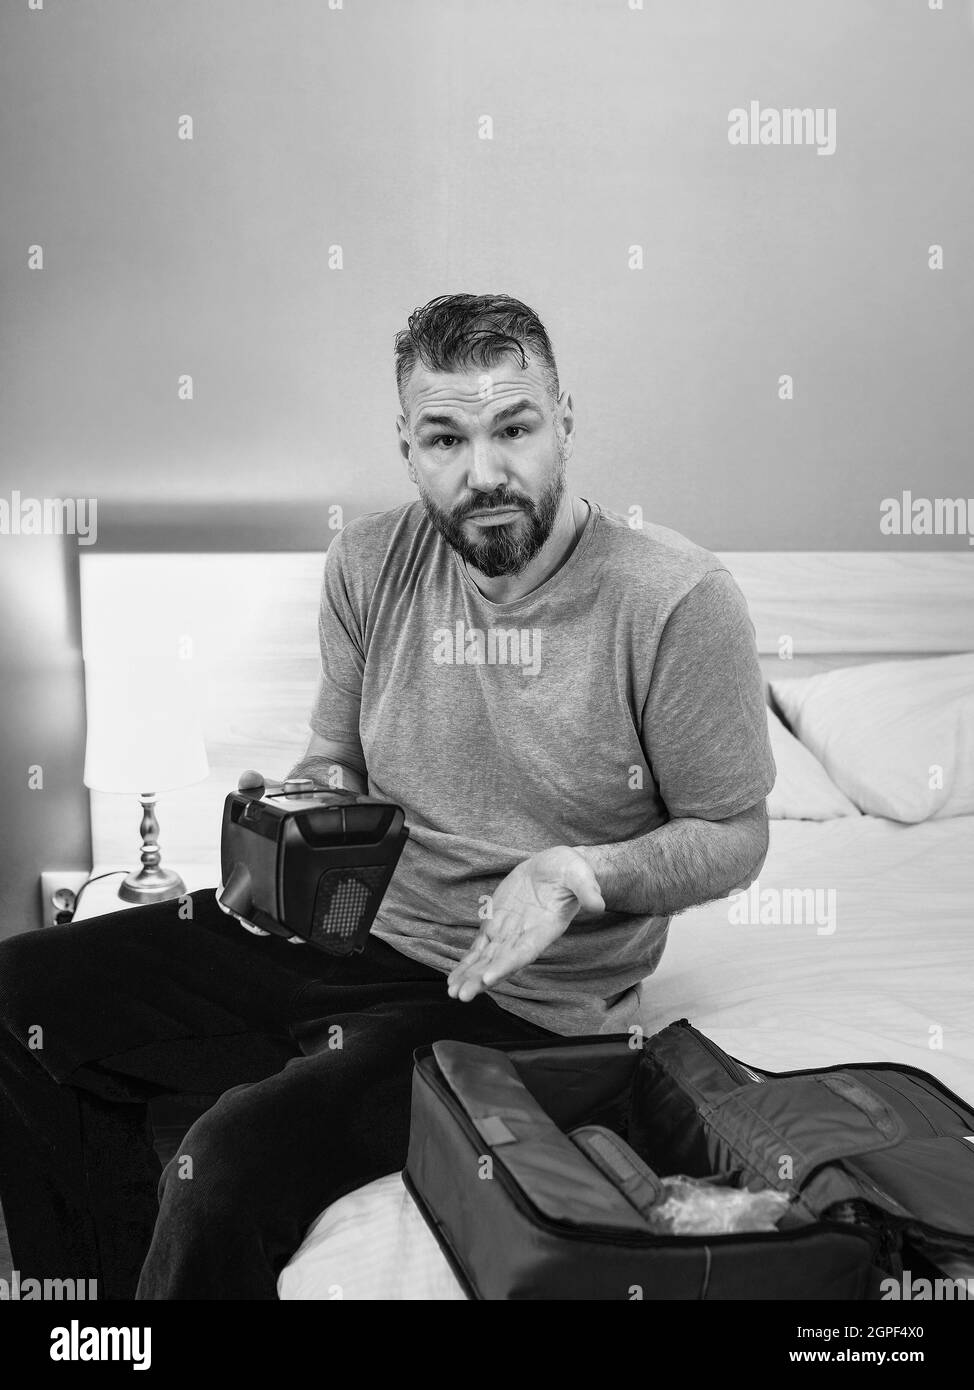 Unhappy shocked man with chronic breathing issues surprised by using  CPAP machine sitting on the bed in bedroom. Stock Photo